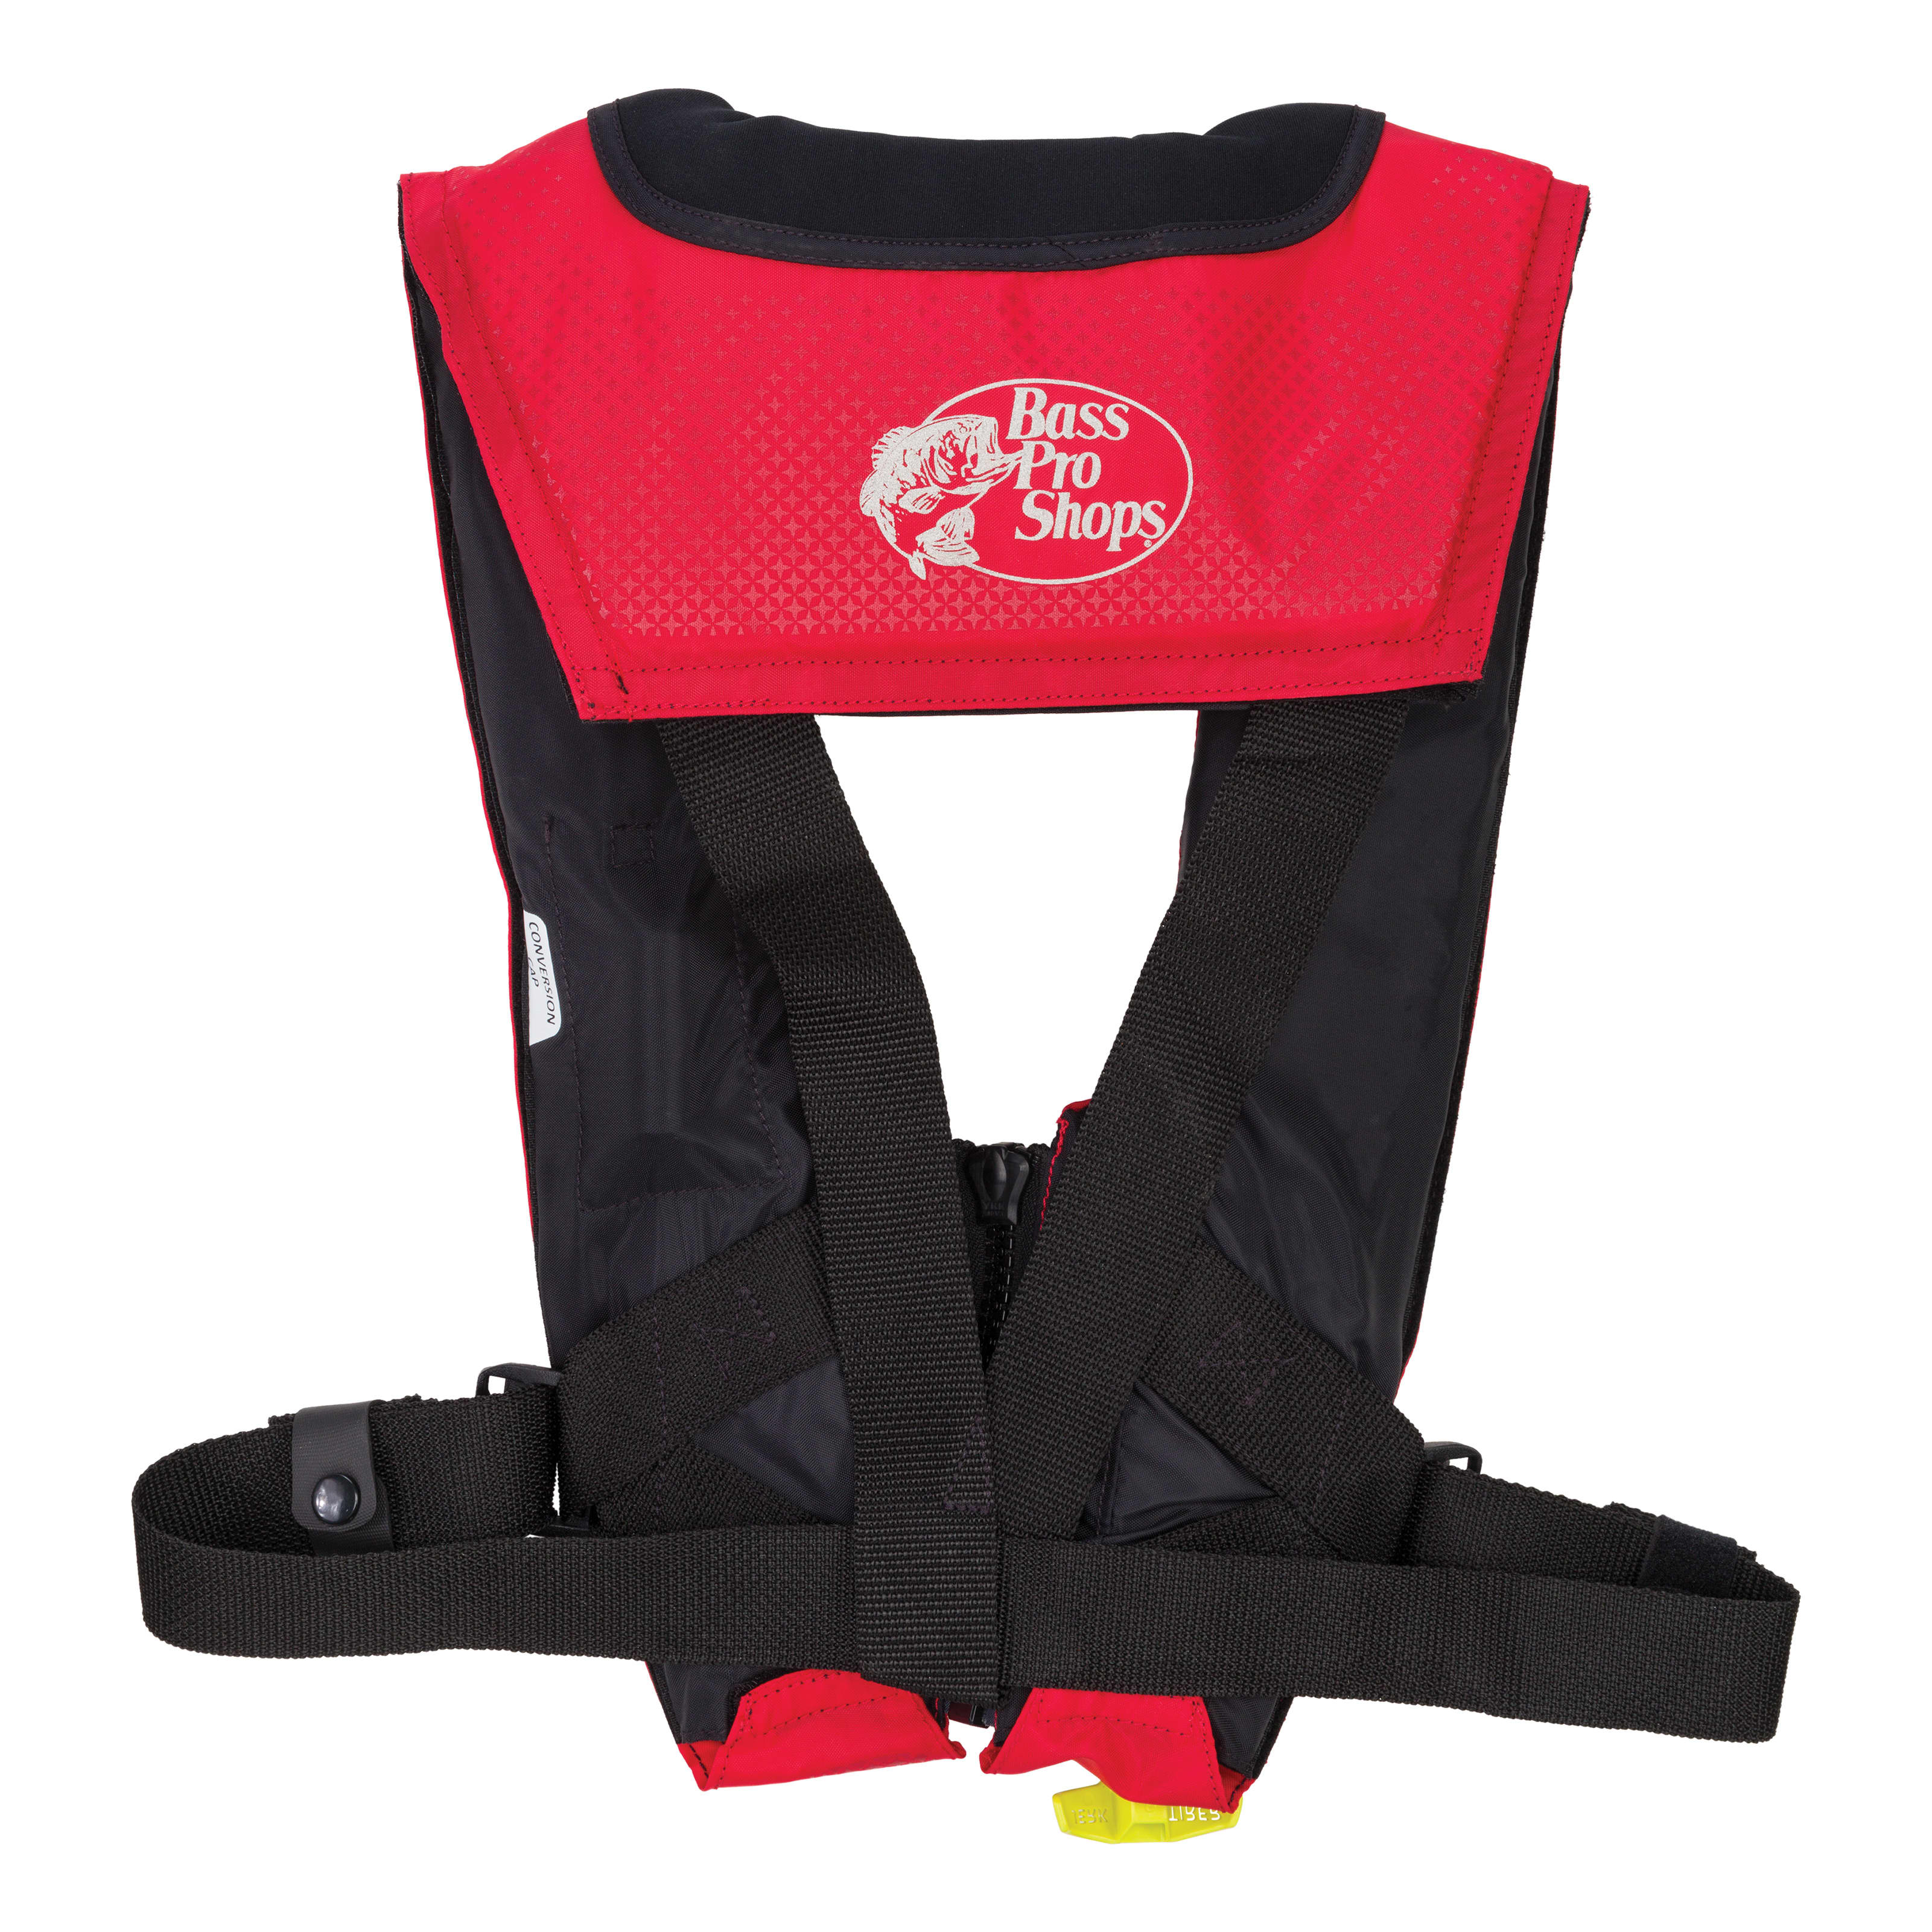 Bass Pro Shops® AM 33 All-Clear™ Auto/Manual-Inflatable Life Vest - Red - Back View